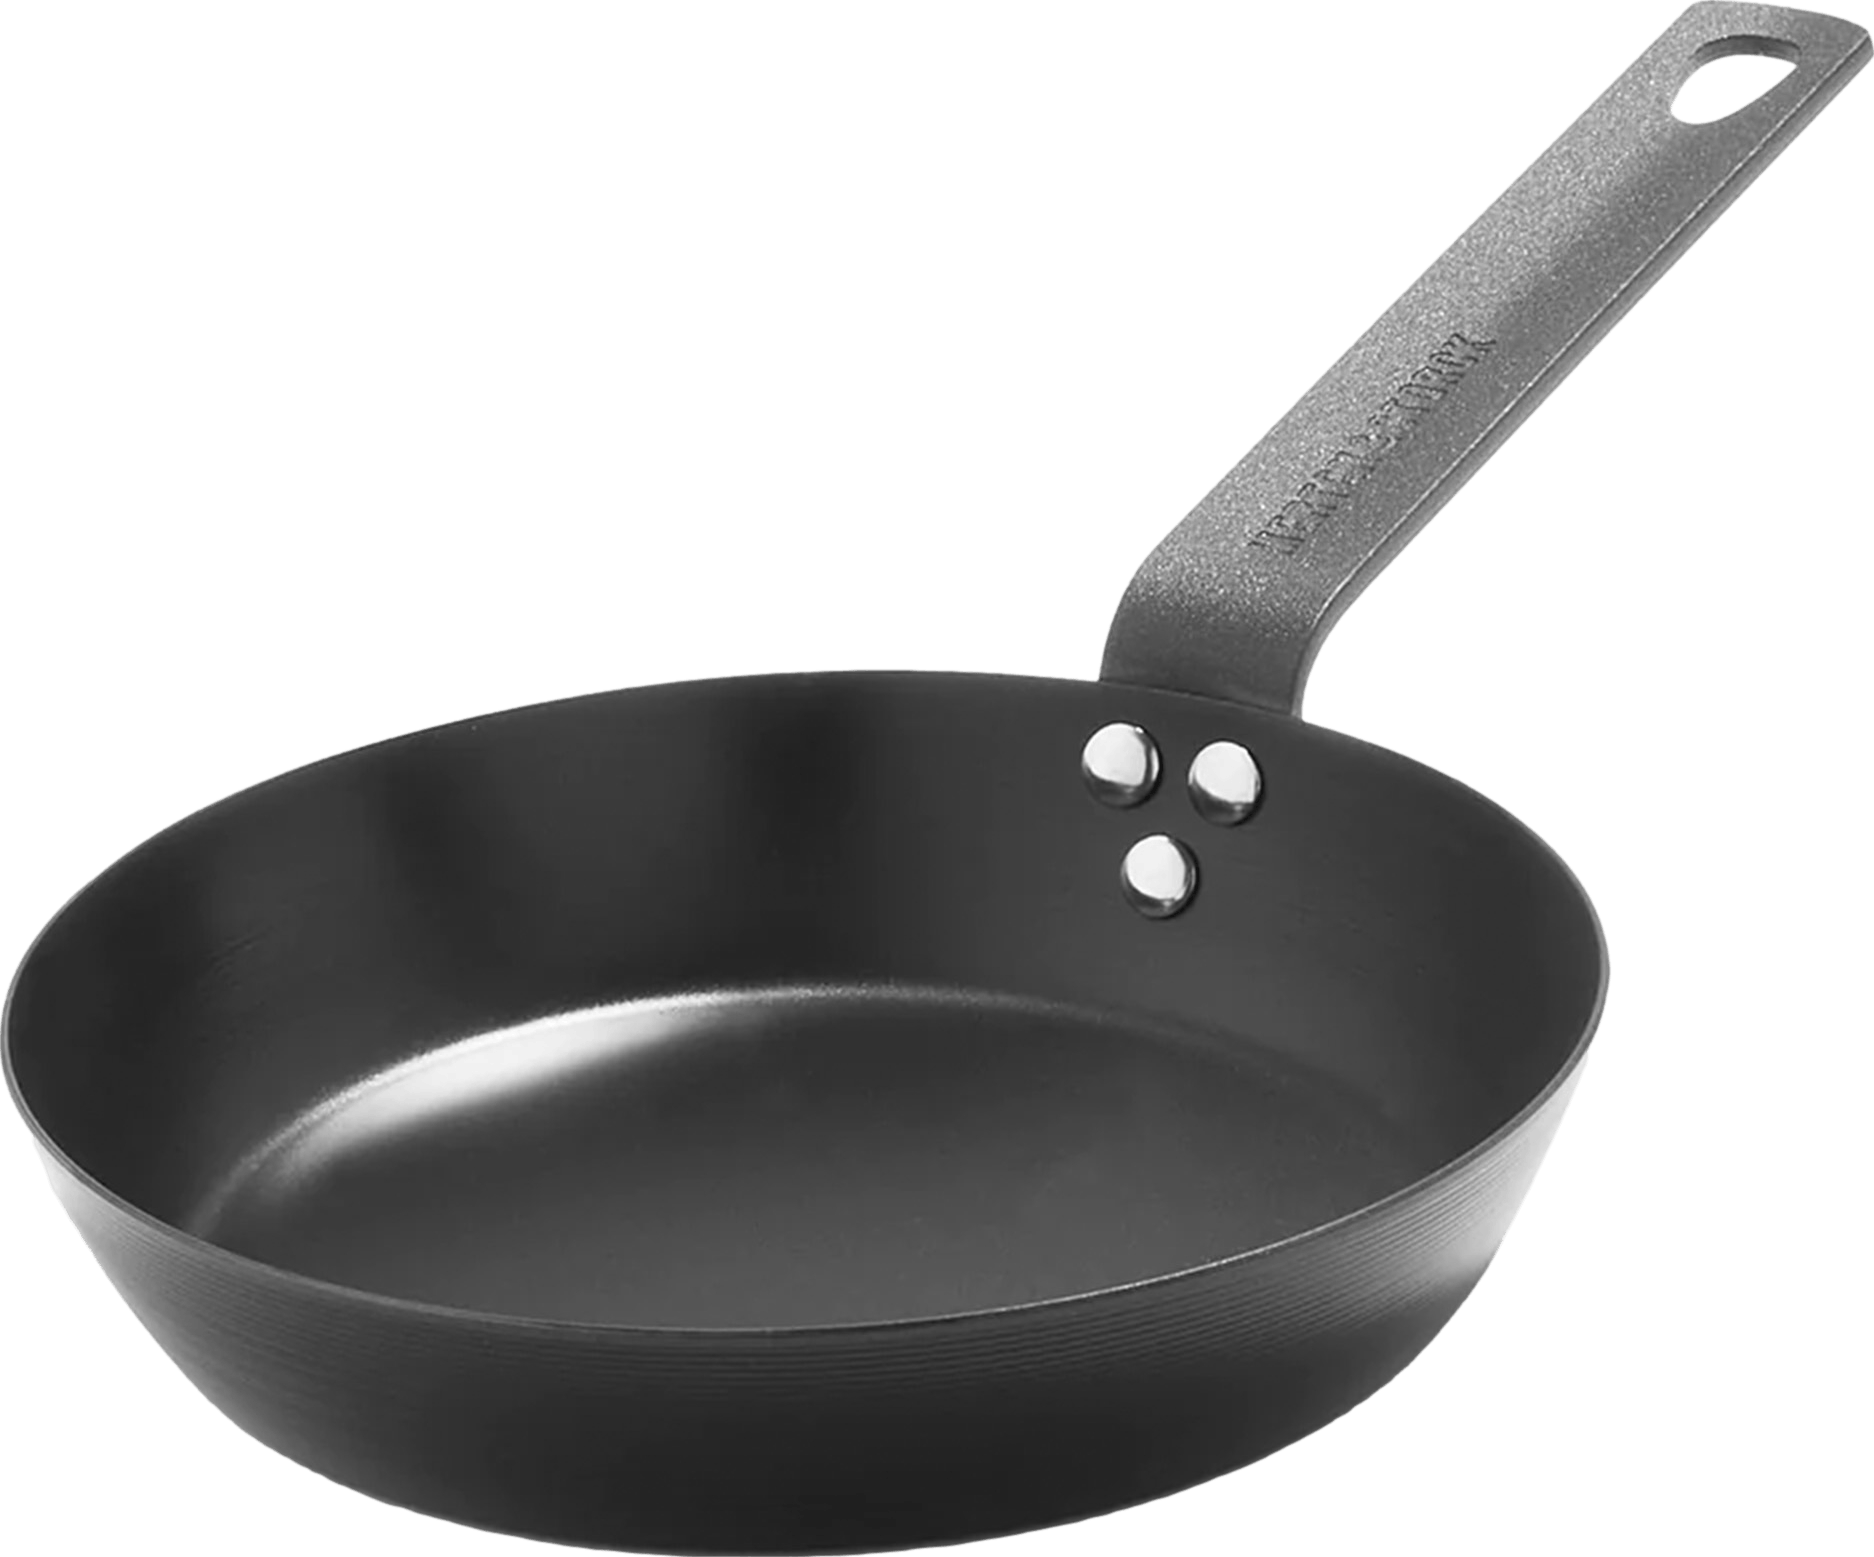 The de Buyer Mineral B Carbon Steel Pan Is 42% Off at